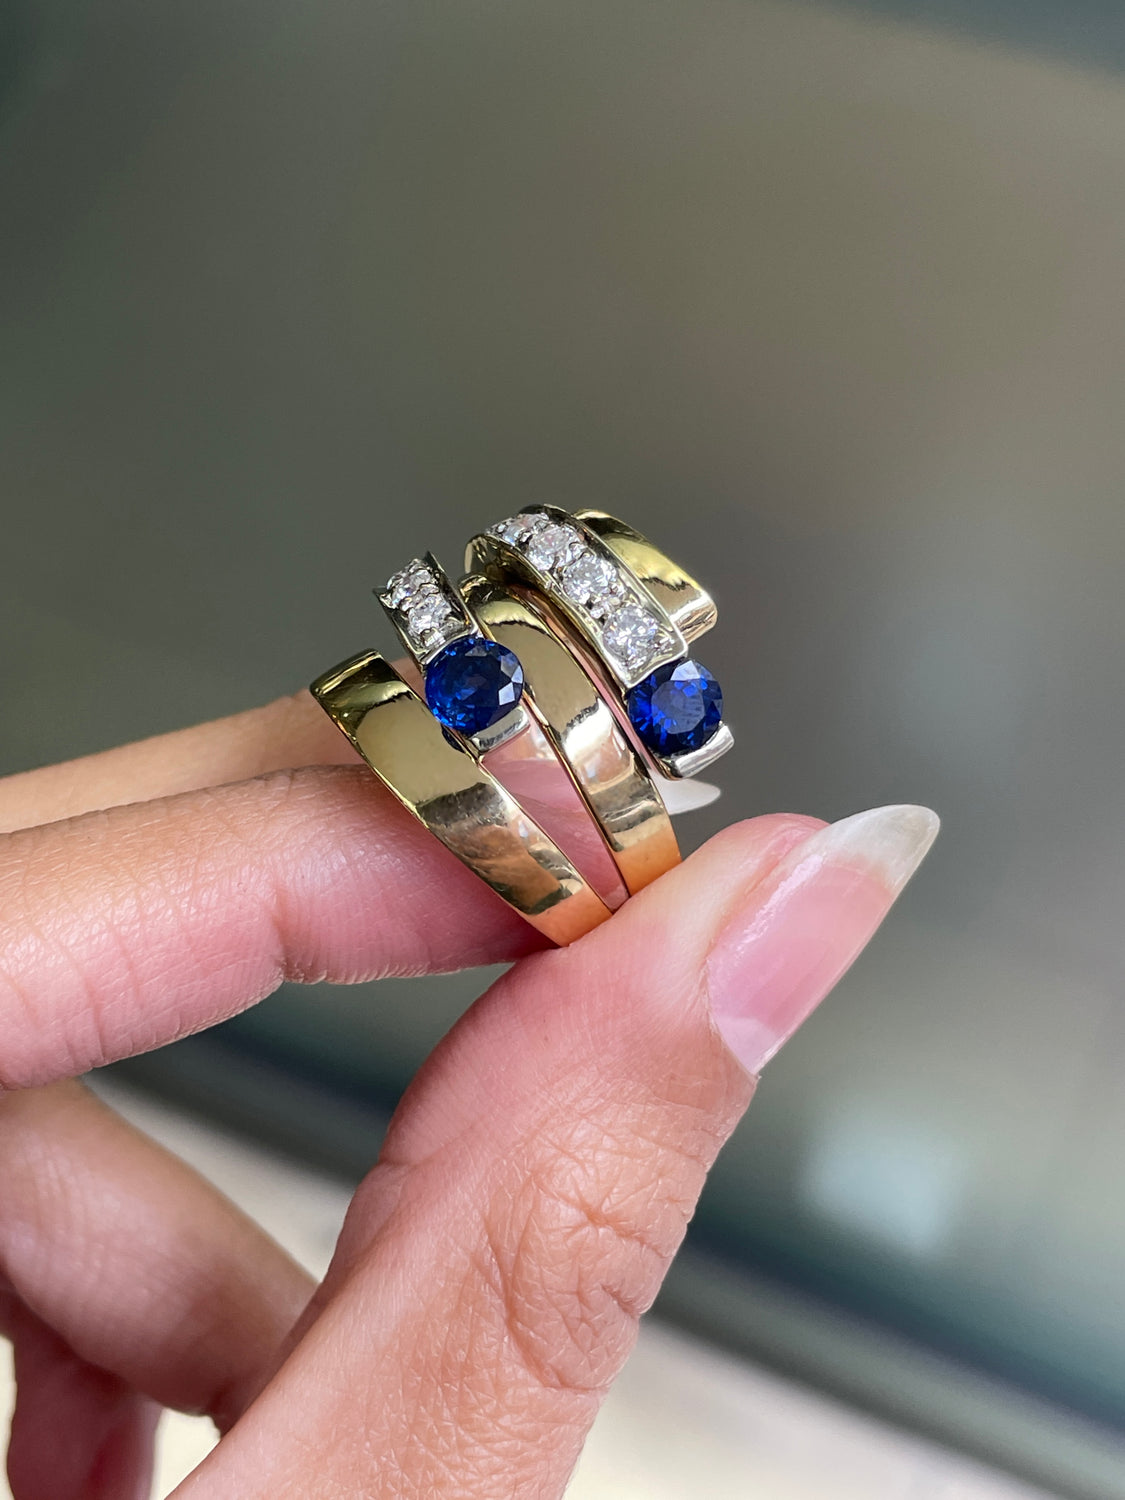 Blue Sapphire and Diamond 18 Carat White & Yellow Gold Wide Bypass Dress Ring